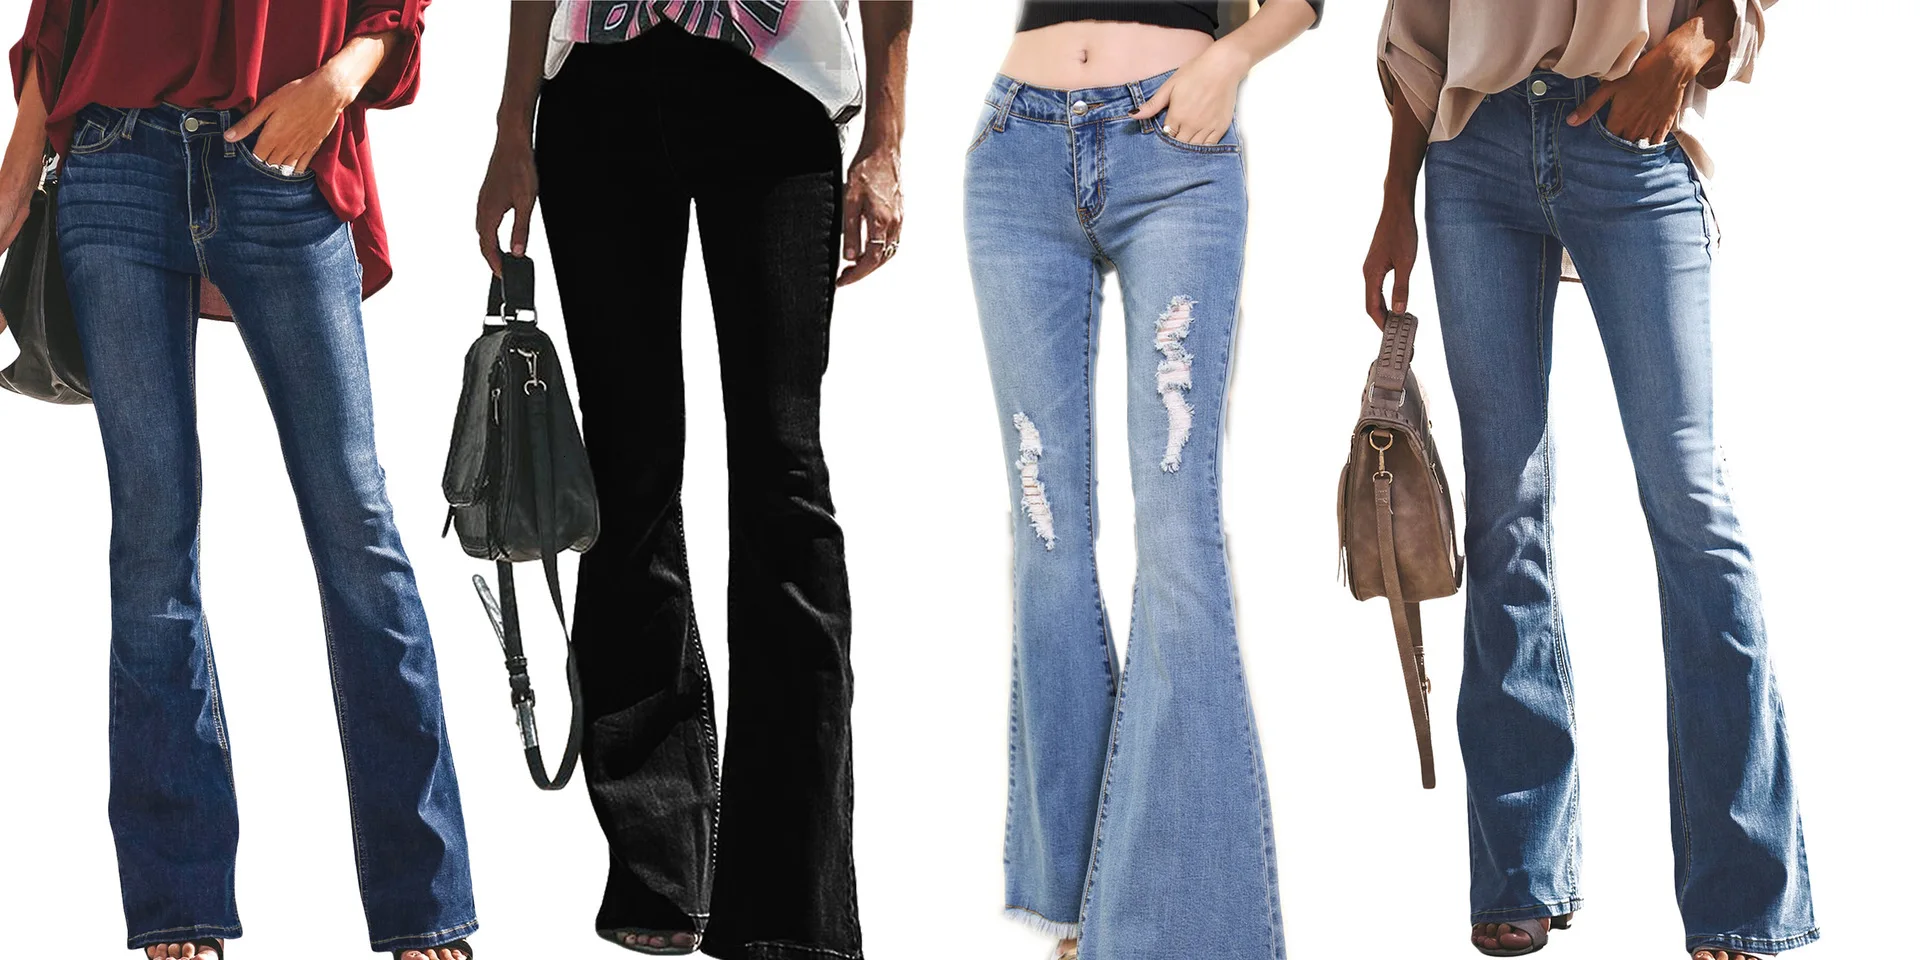 High Women Destroyed Ripped Jeans Skinny Hole Pants Sexy Waist Stretch Jeans Slim Wide Leg Black Blue Denim Flare Trousers